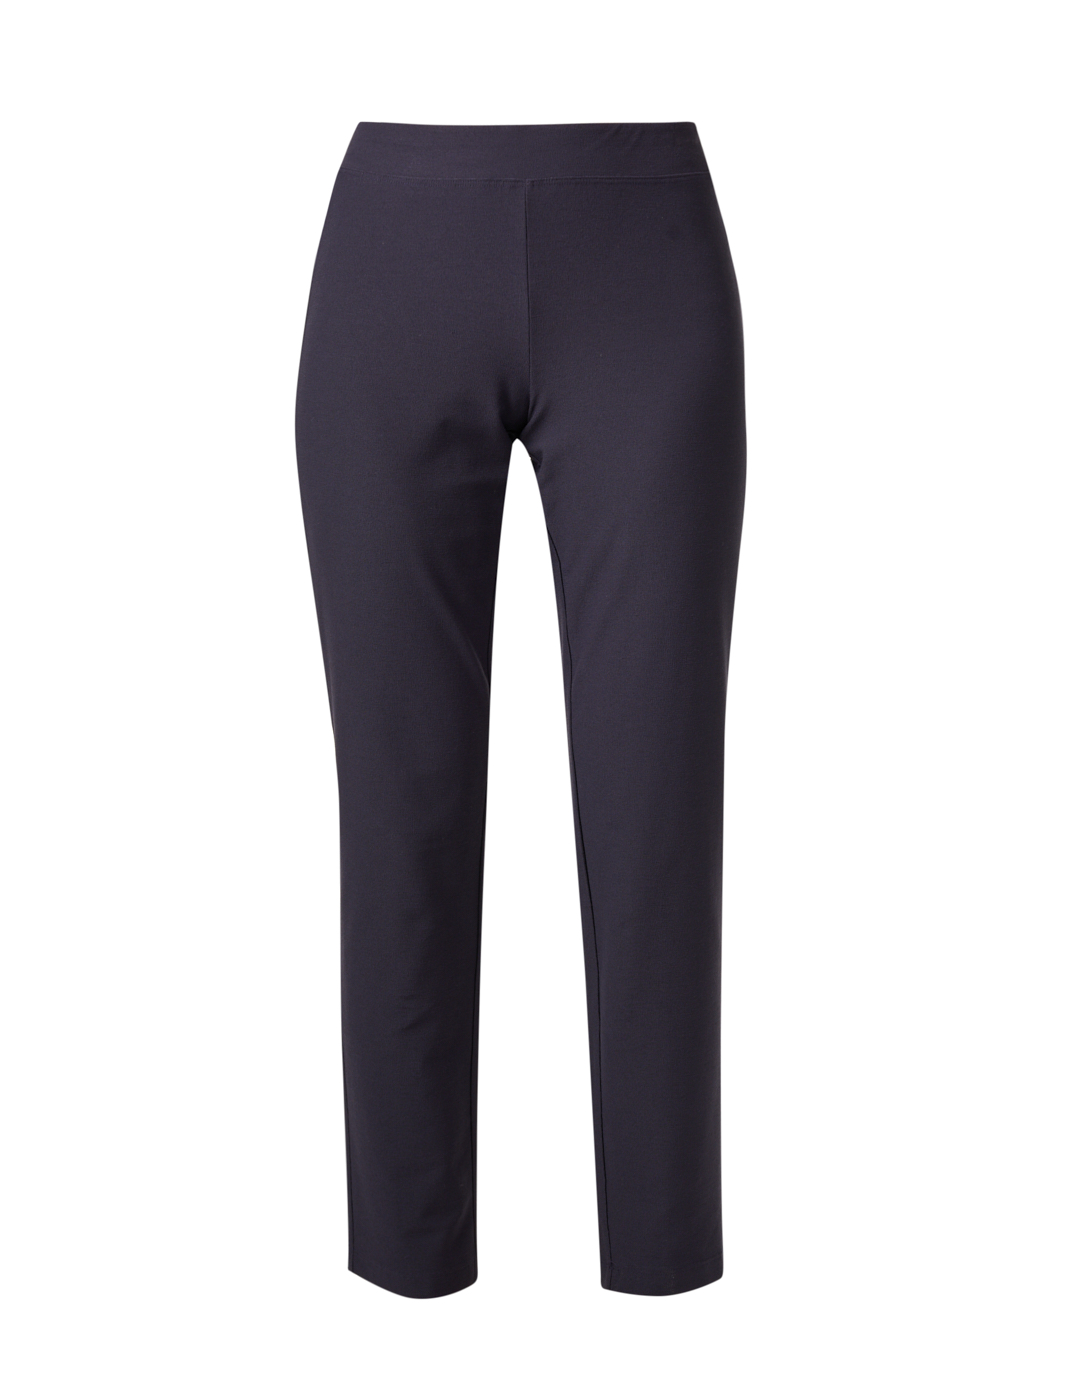 Ankle Fit Navy Blue 4 Way Stretchable Formal Pants